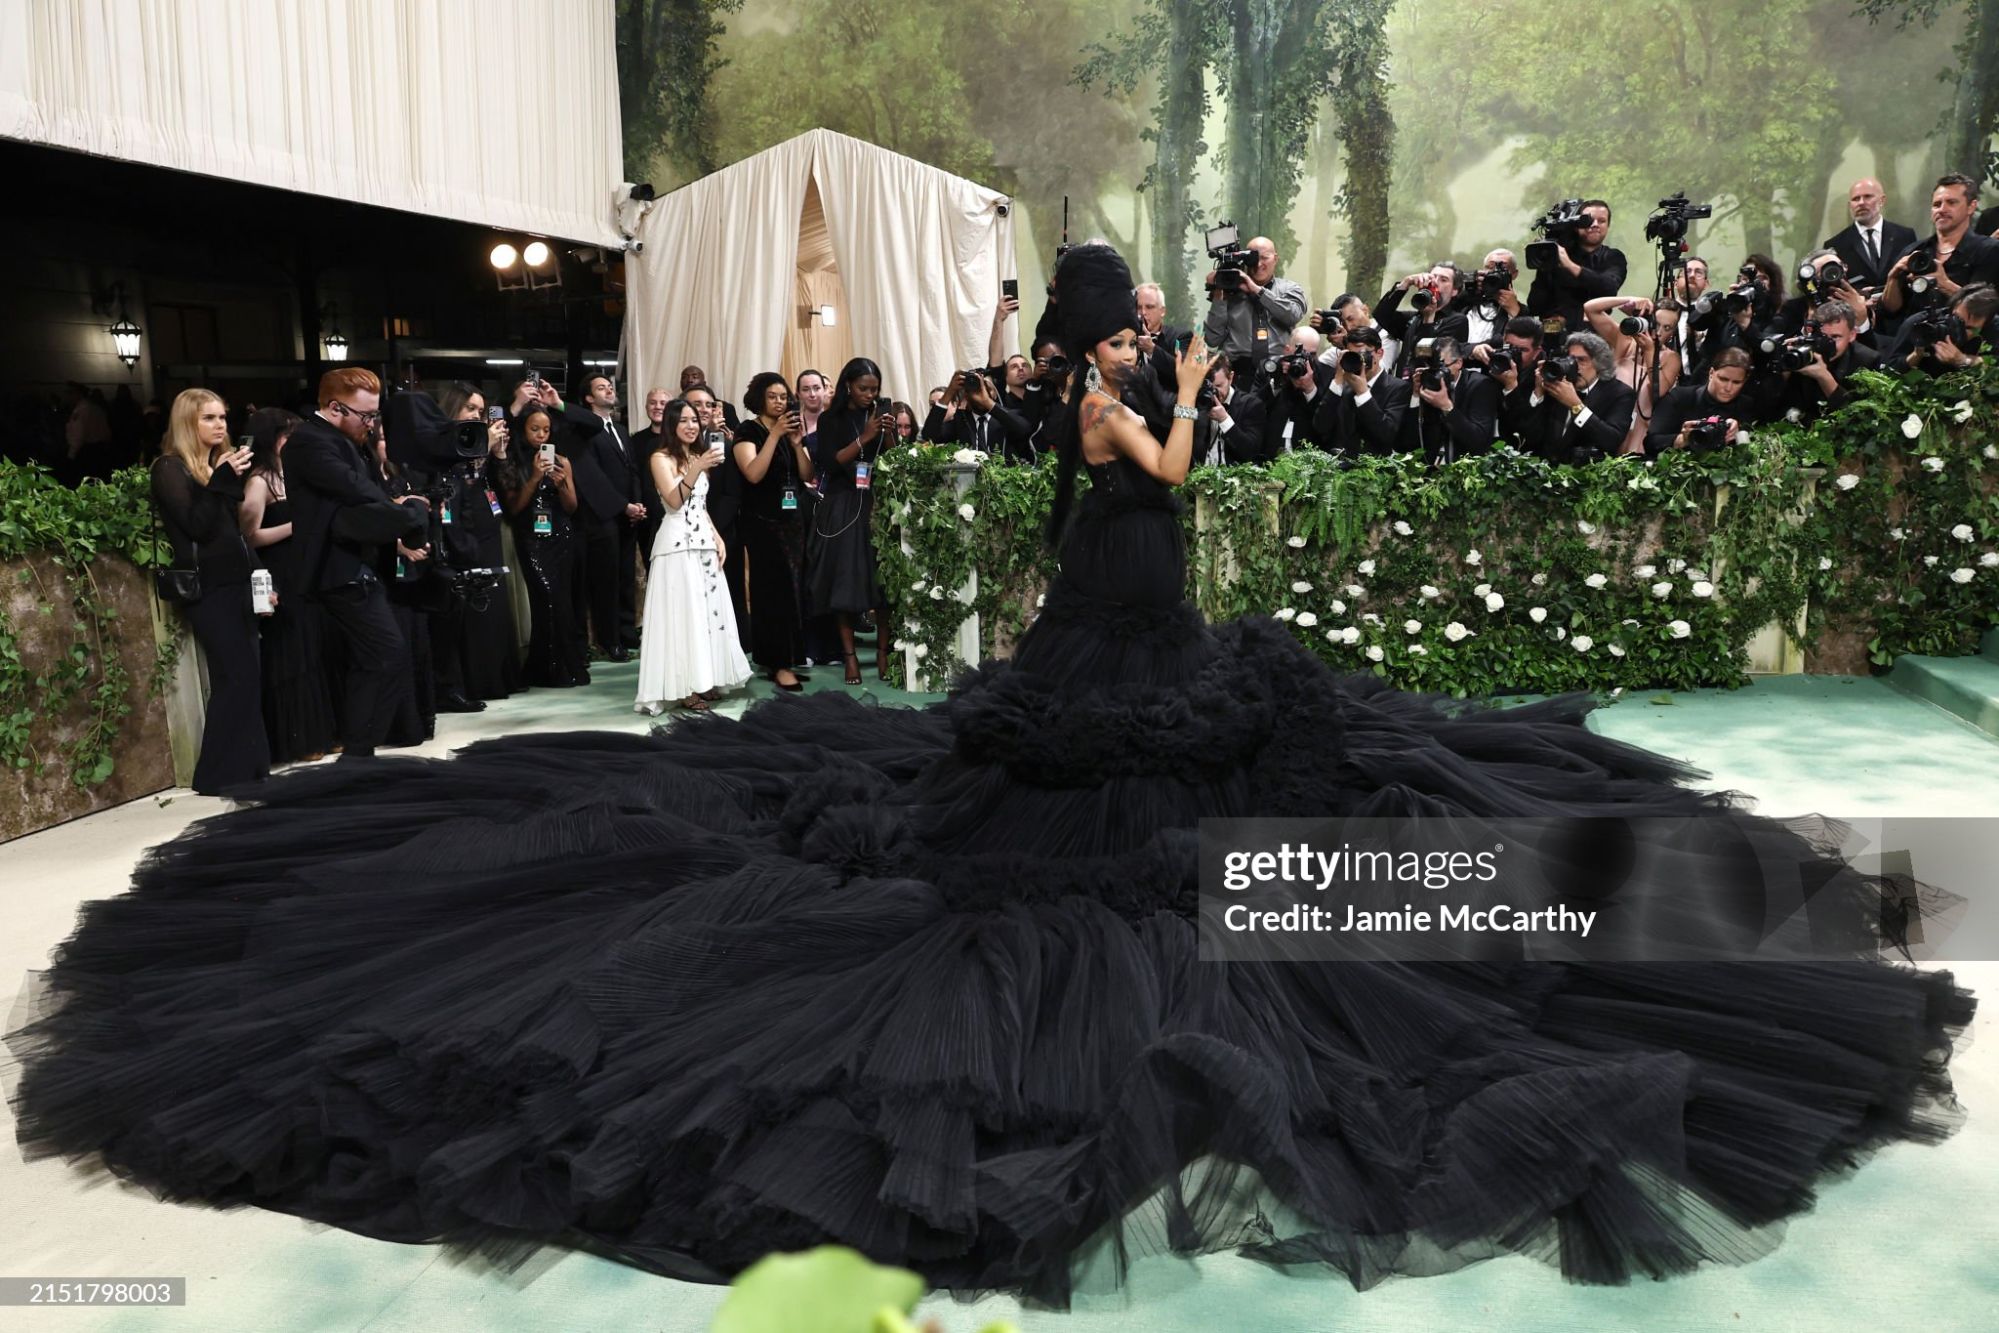 gettyimages-2151798003-2048x2048.jpg